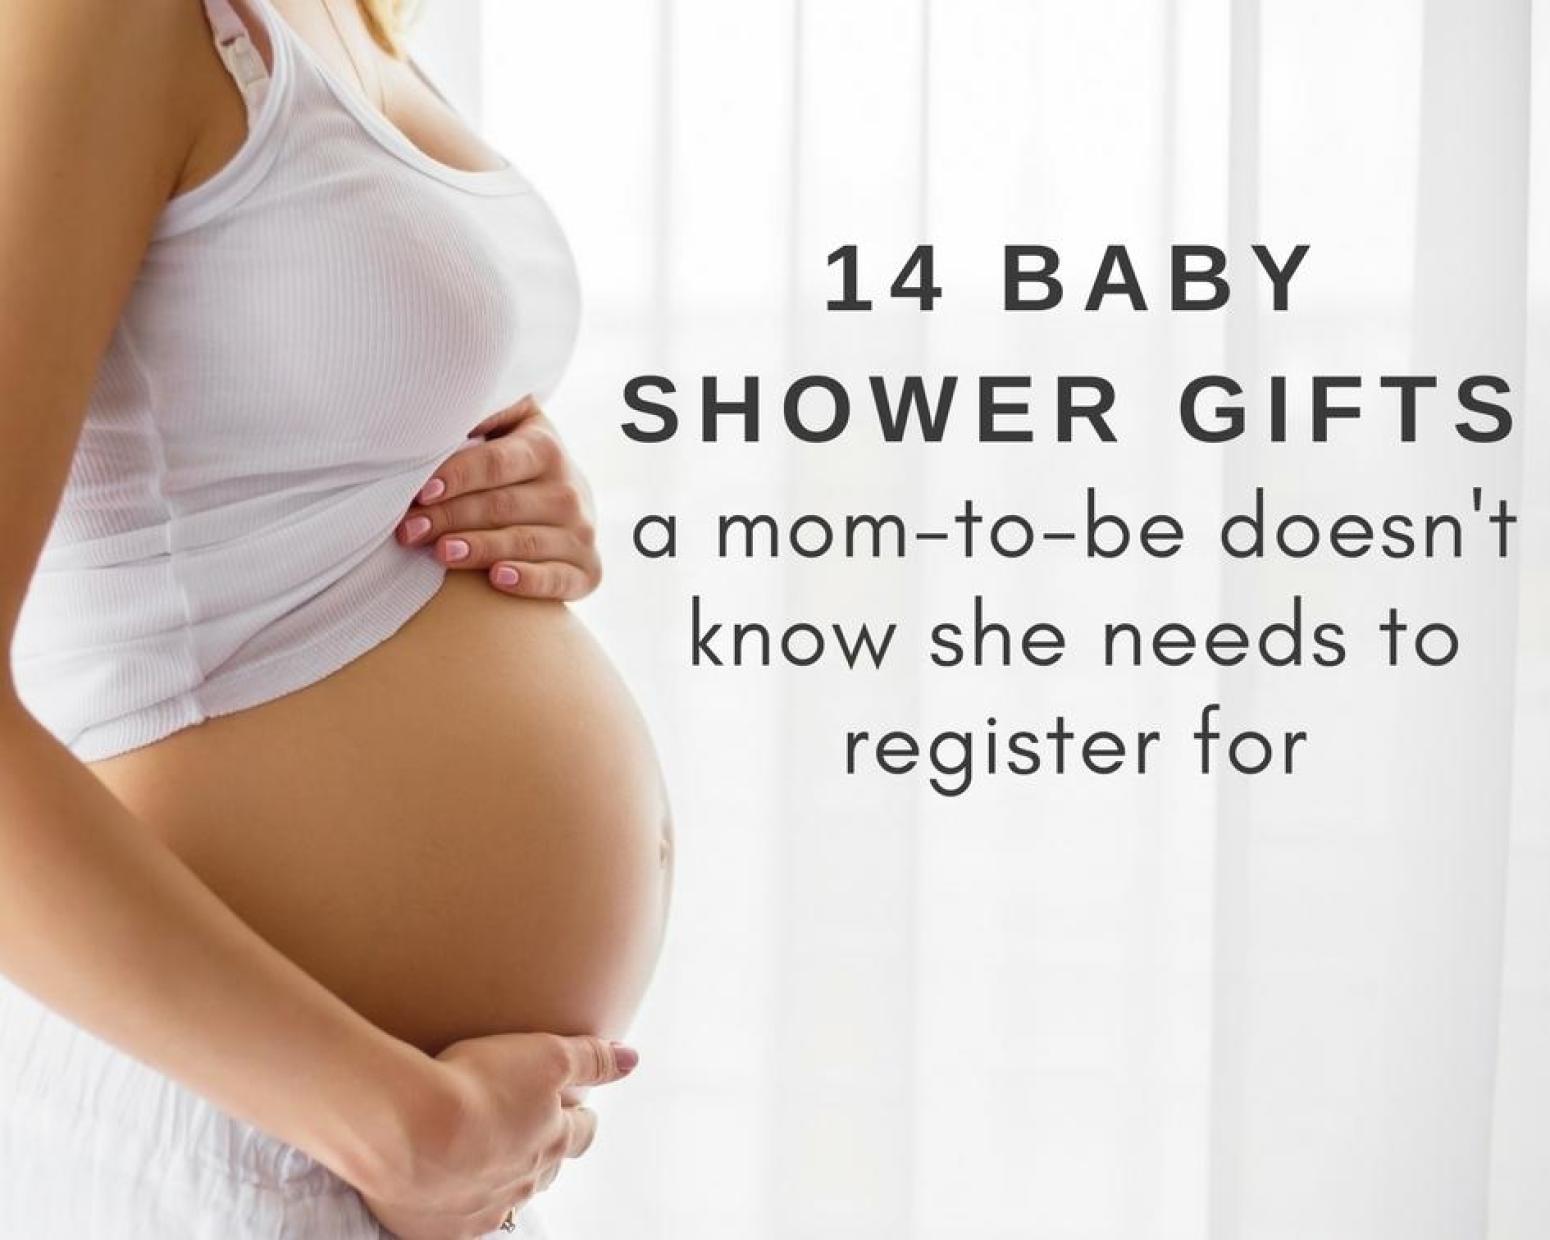 14 Baby Shower Gifts A Mom-to-Be Know She Needs to Register For - Just A Pinch